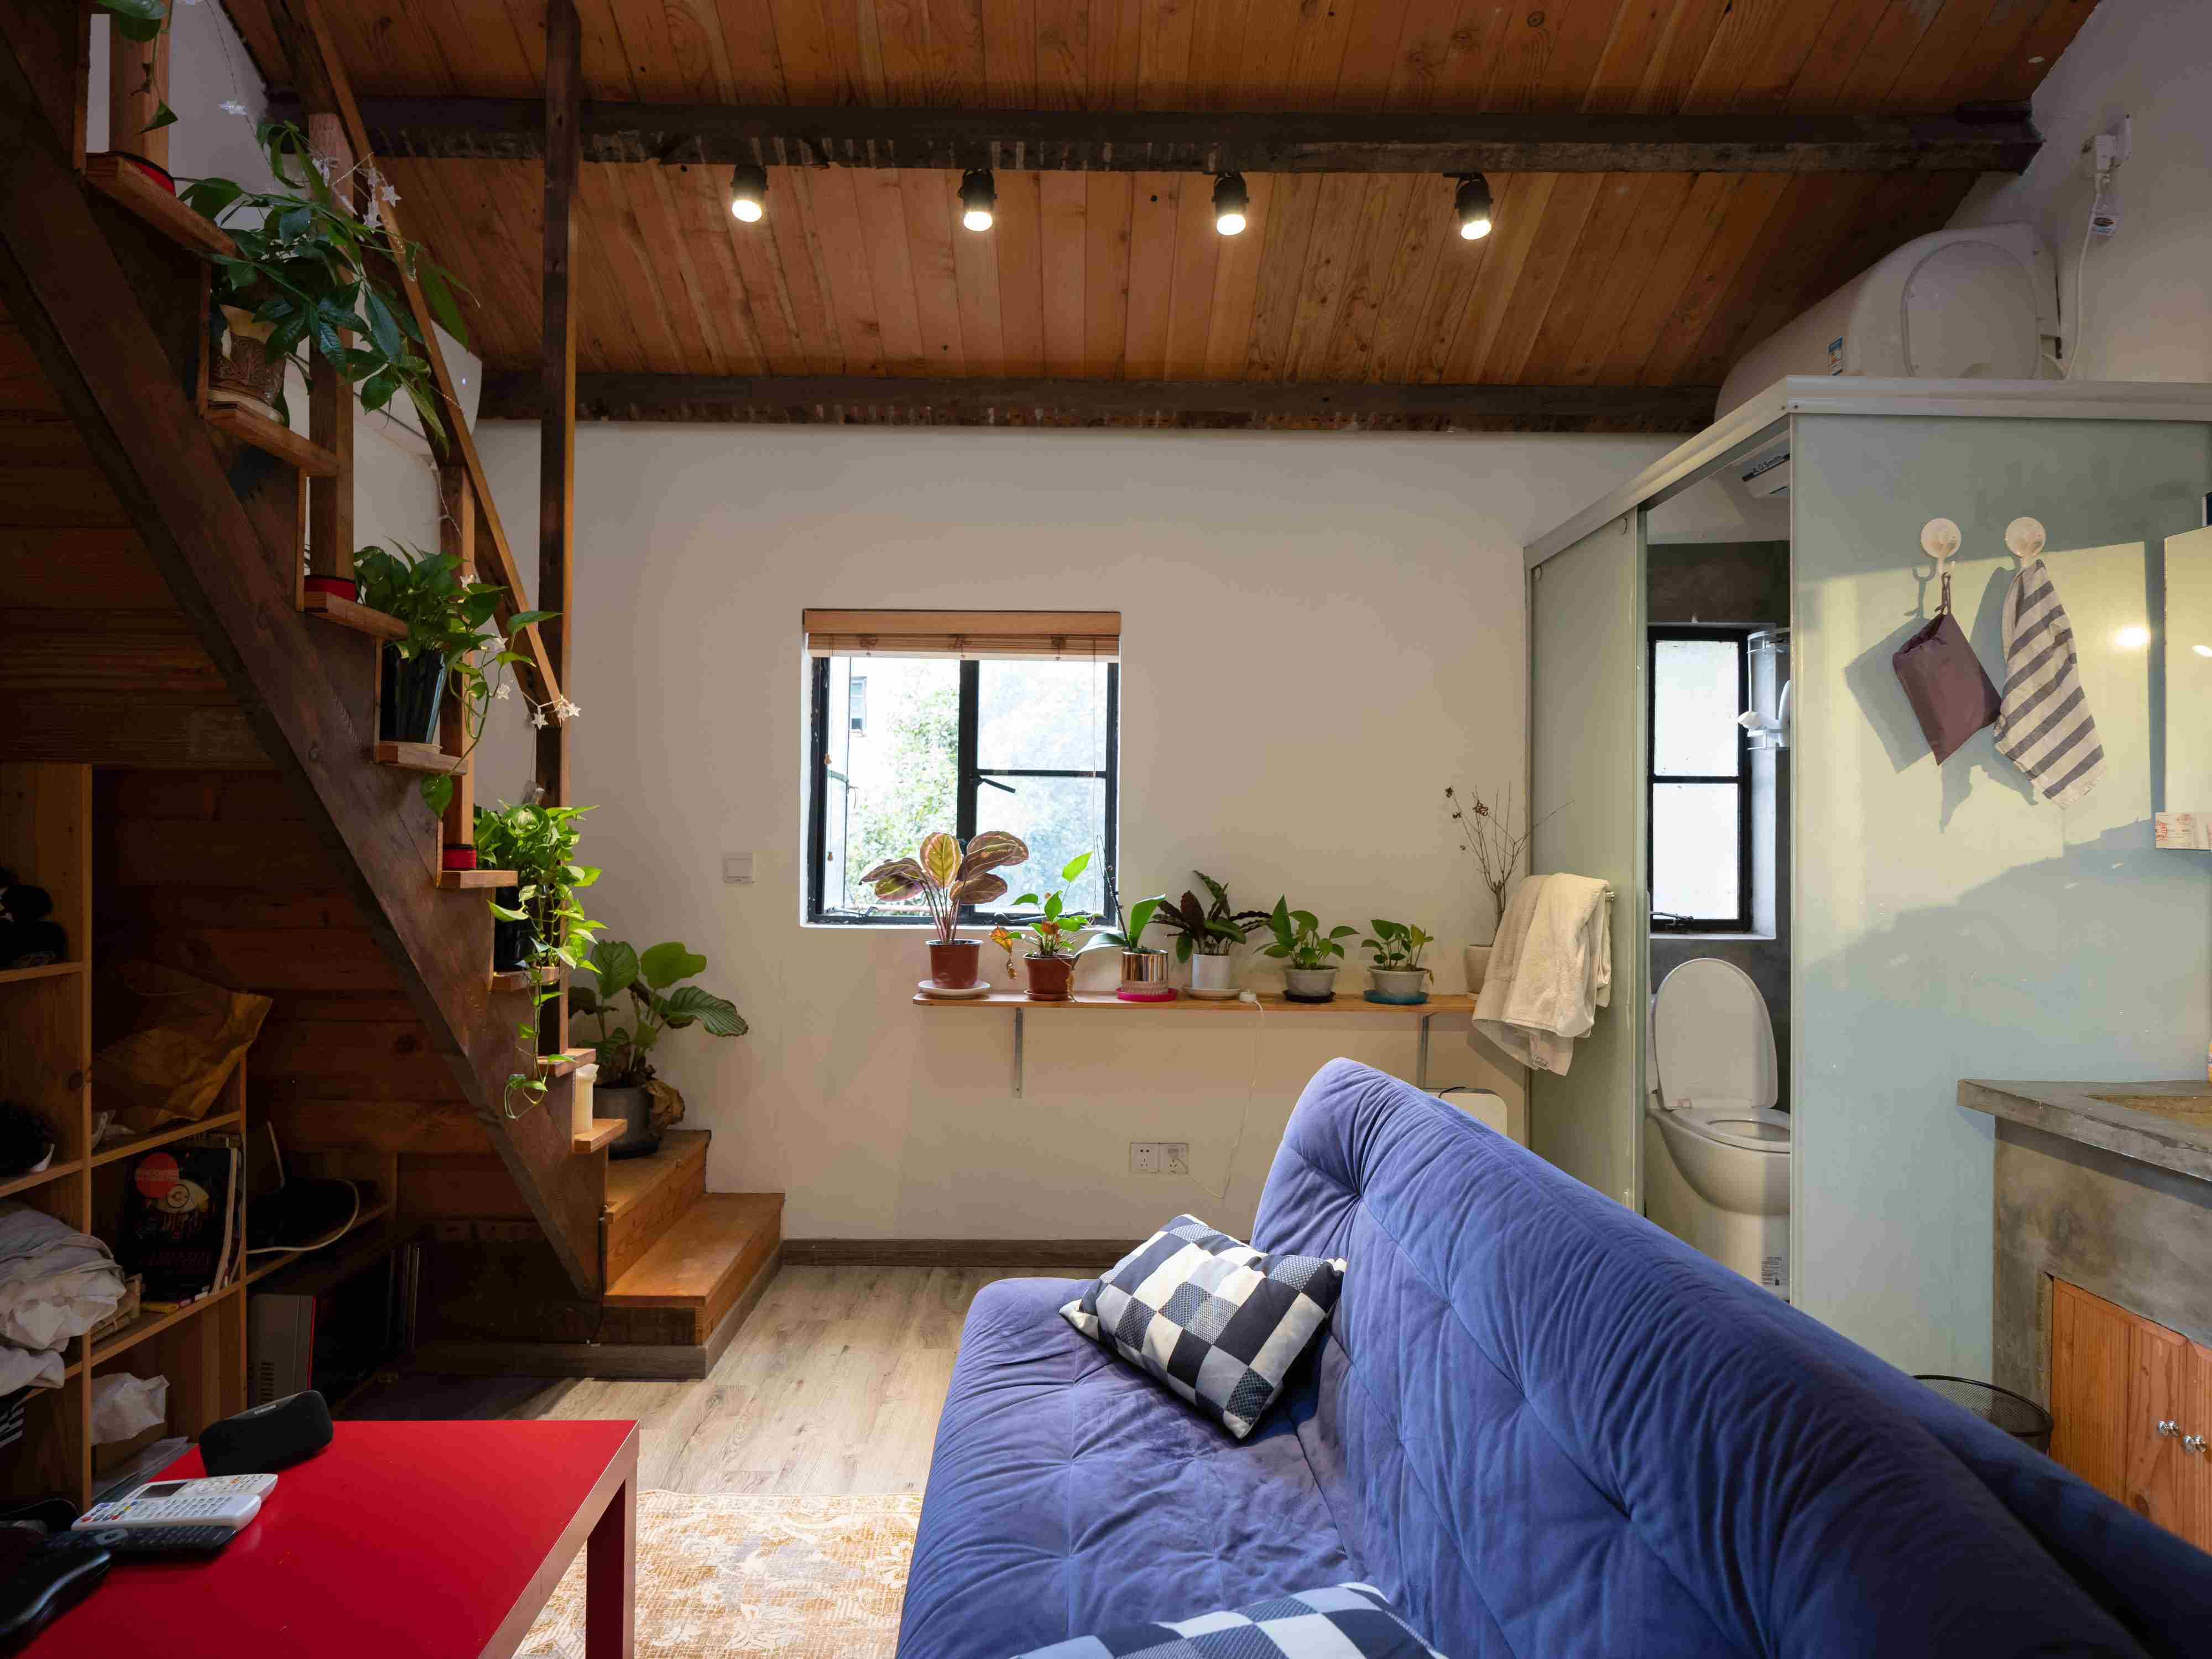  Cozy Loft Apartment in Former French Concession